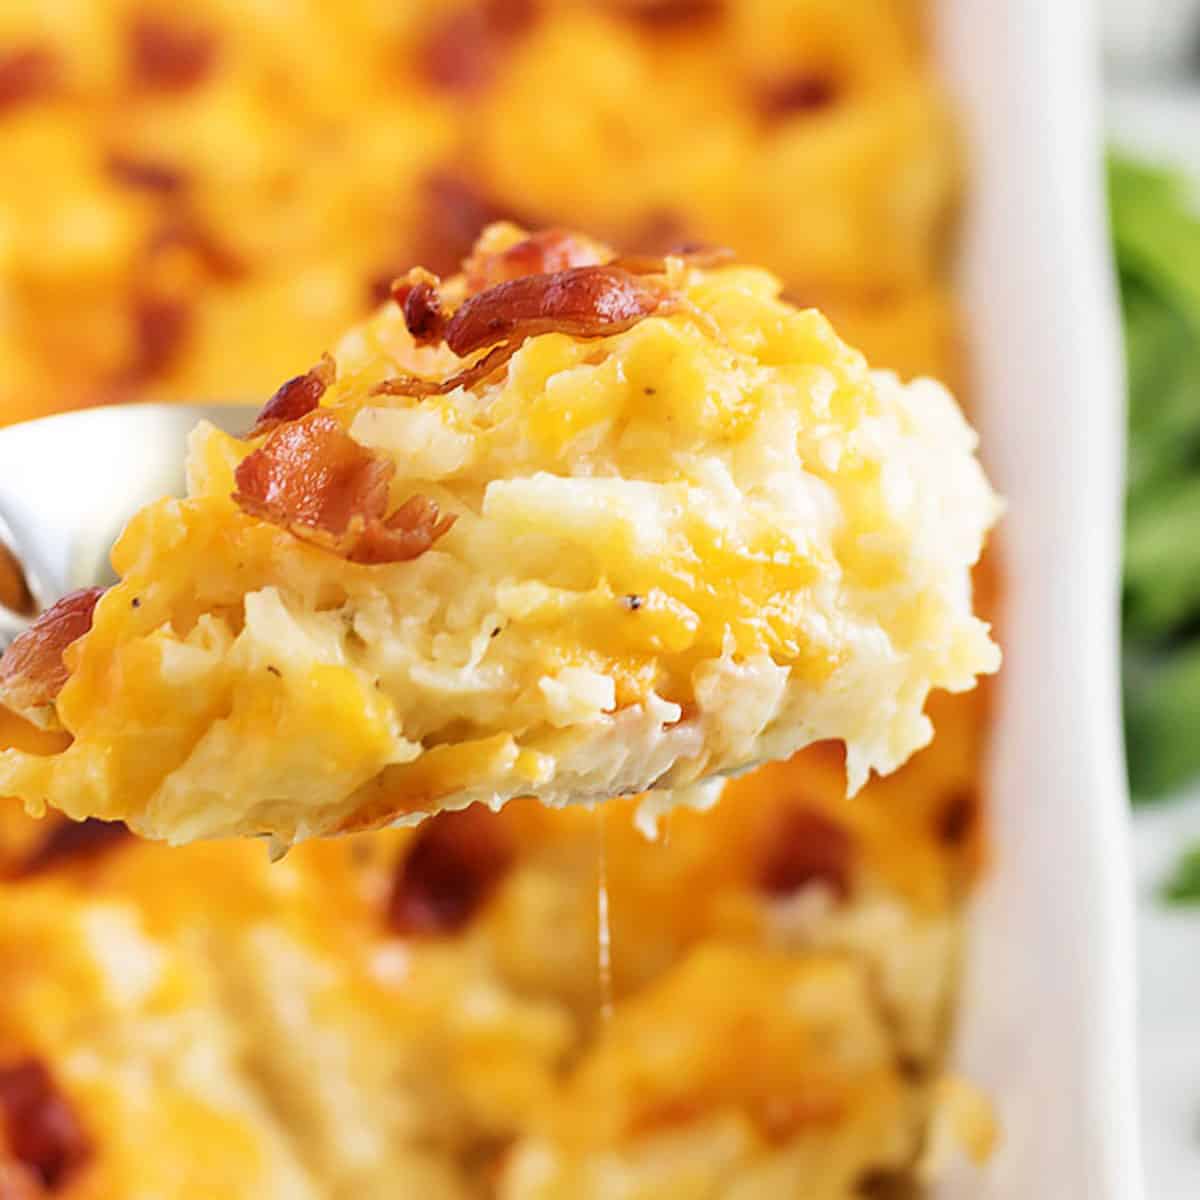 Scoop of hash brown casserole with bacon being held over a baking dish.